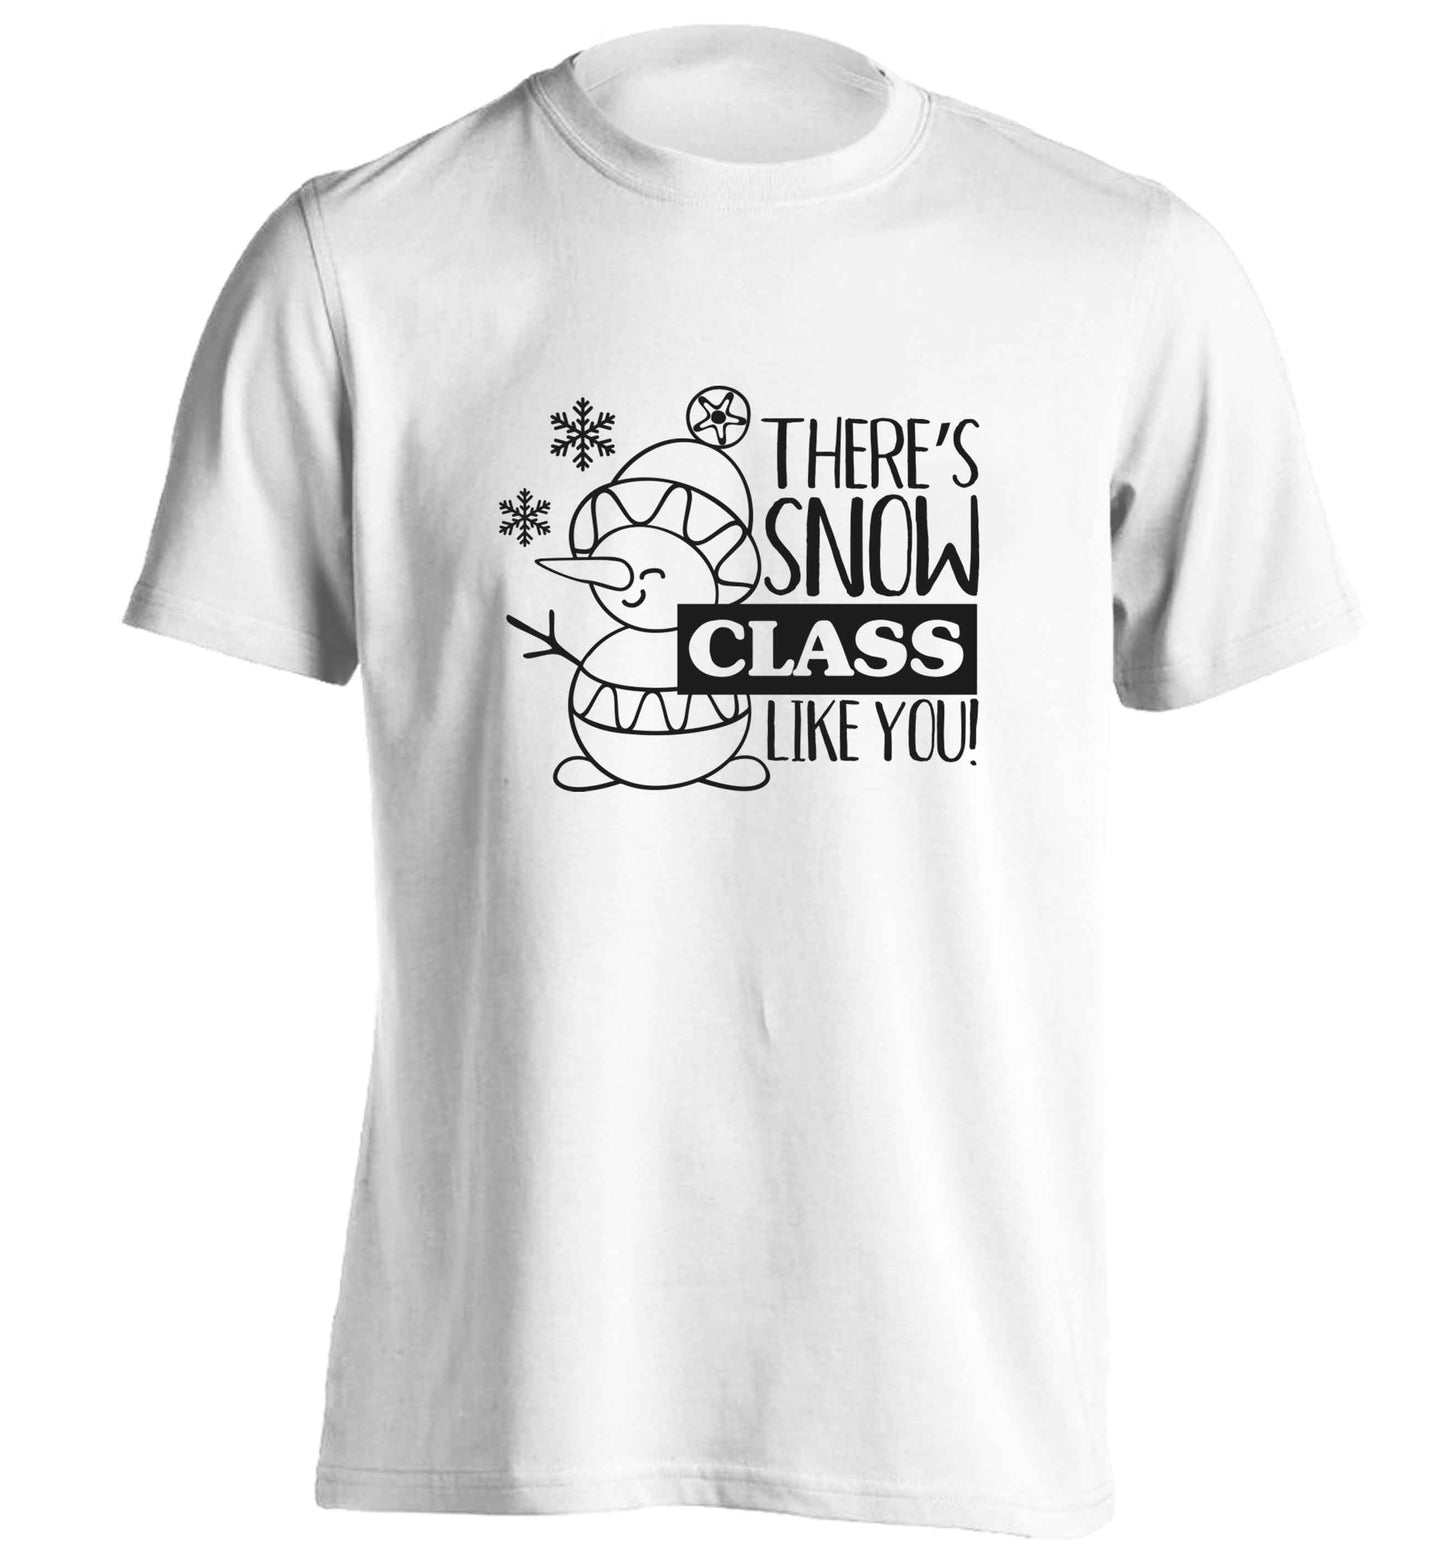 There's snow class like you adults unisex white Tshirt 2XL